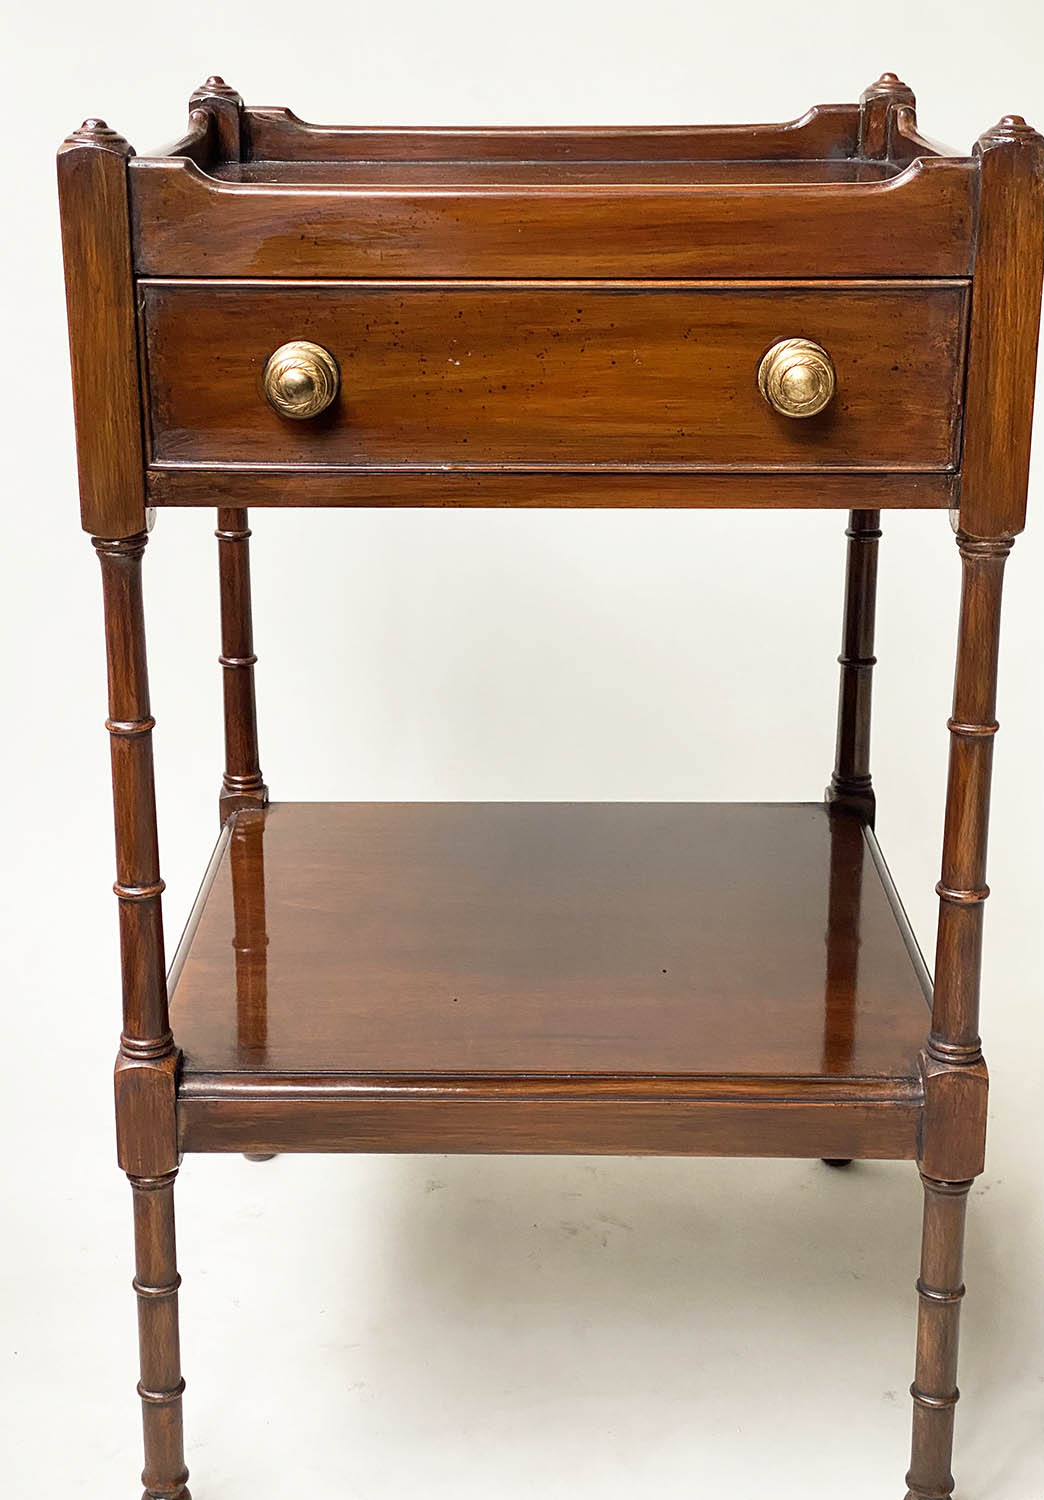 LAMP TABLES, a pair, George III design mahogany, each galleried with frieze drawer and under tier, - Image 2 of 8